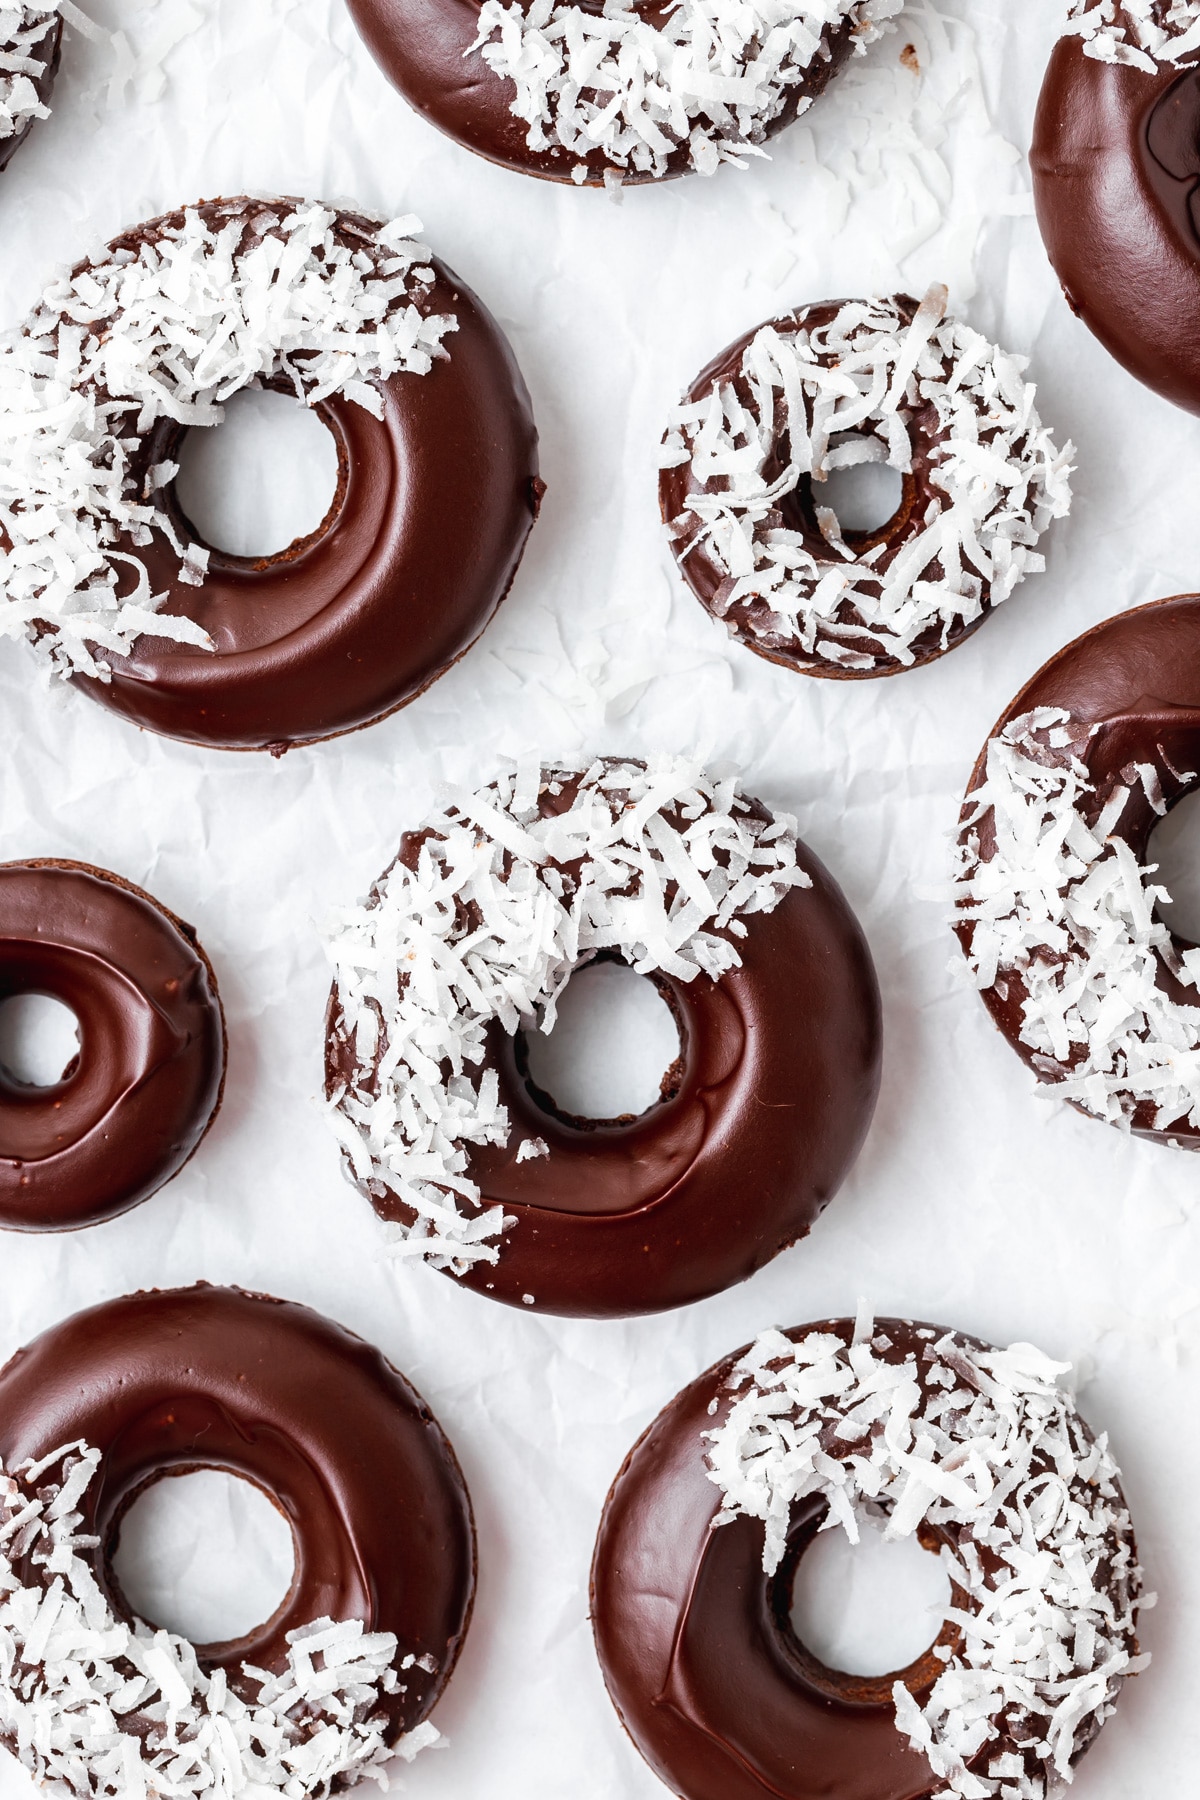 baked chocolate donuts with coconut flakes on top.